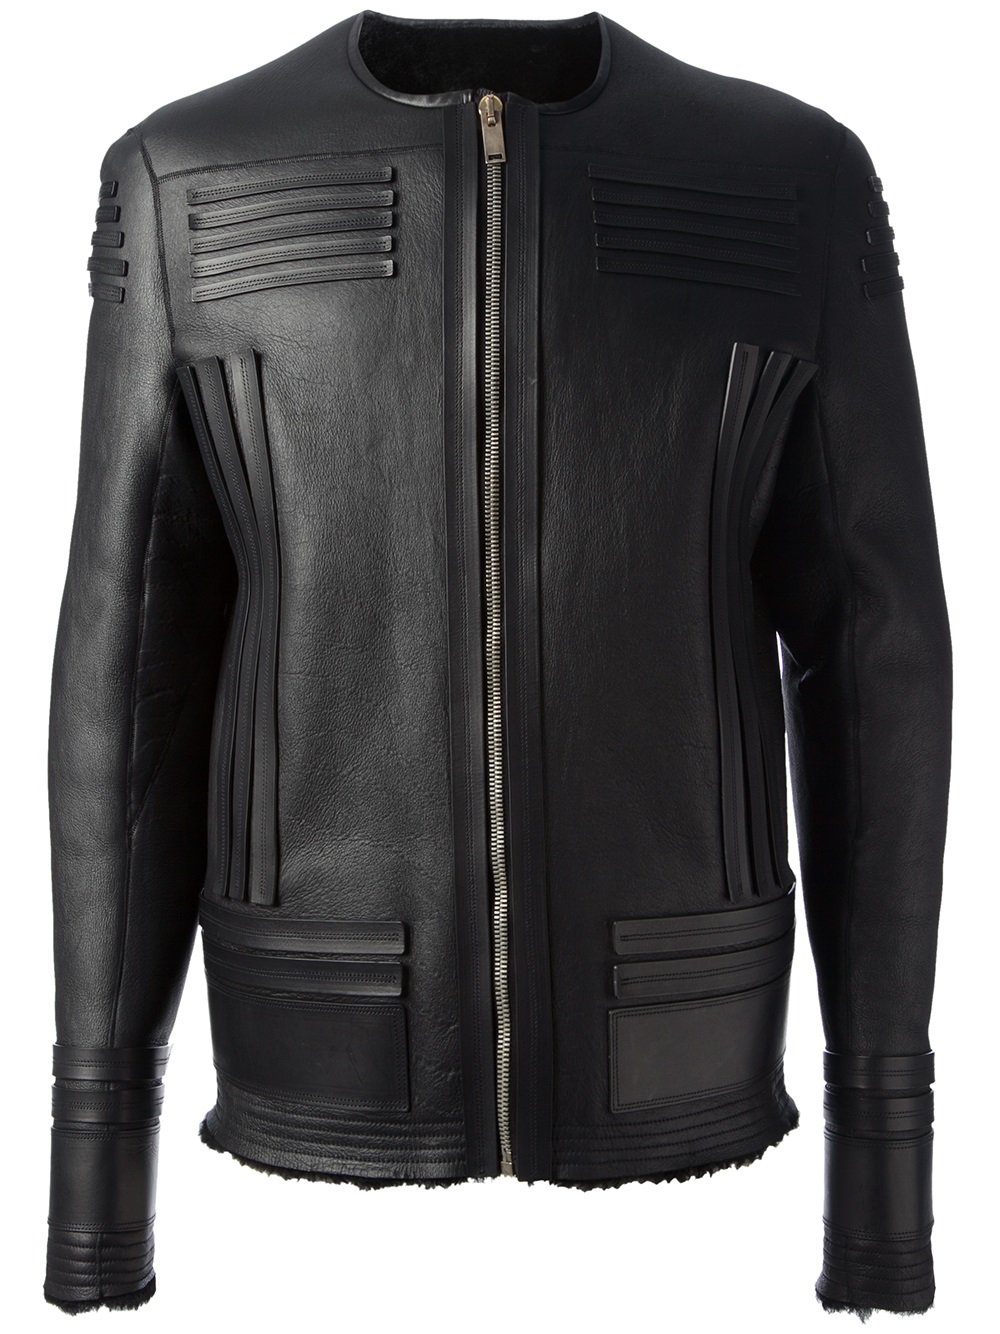 Lyst - Rick owens Ribbed Leather Jacket in Black for Men